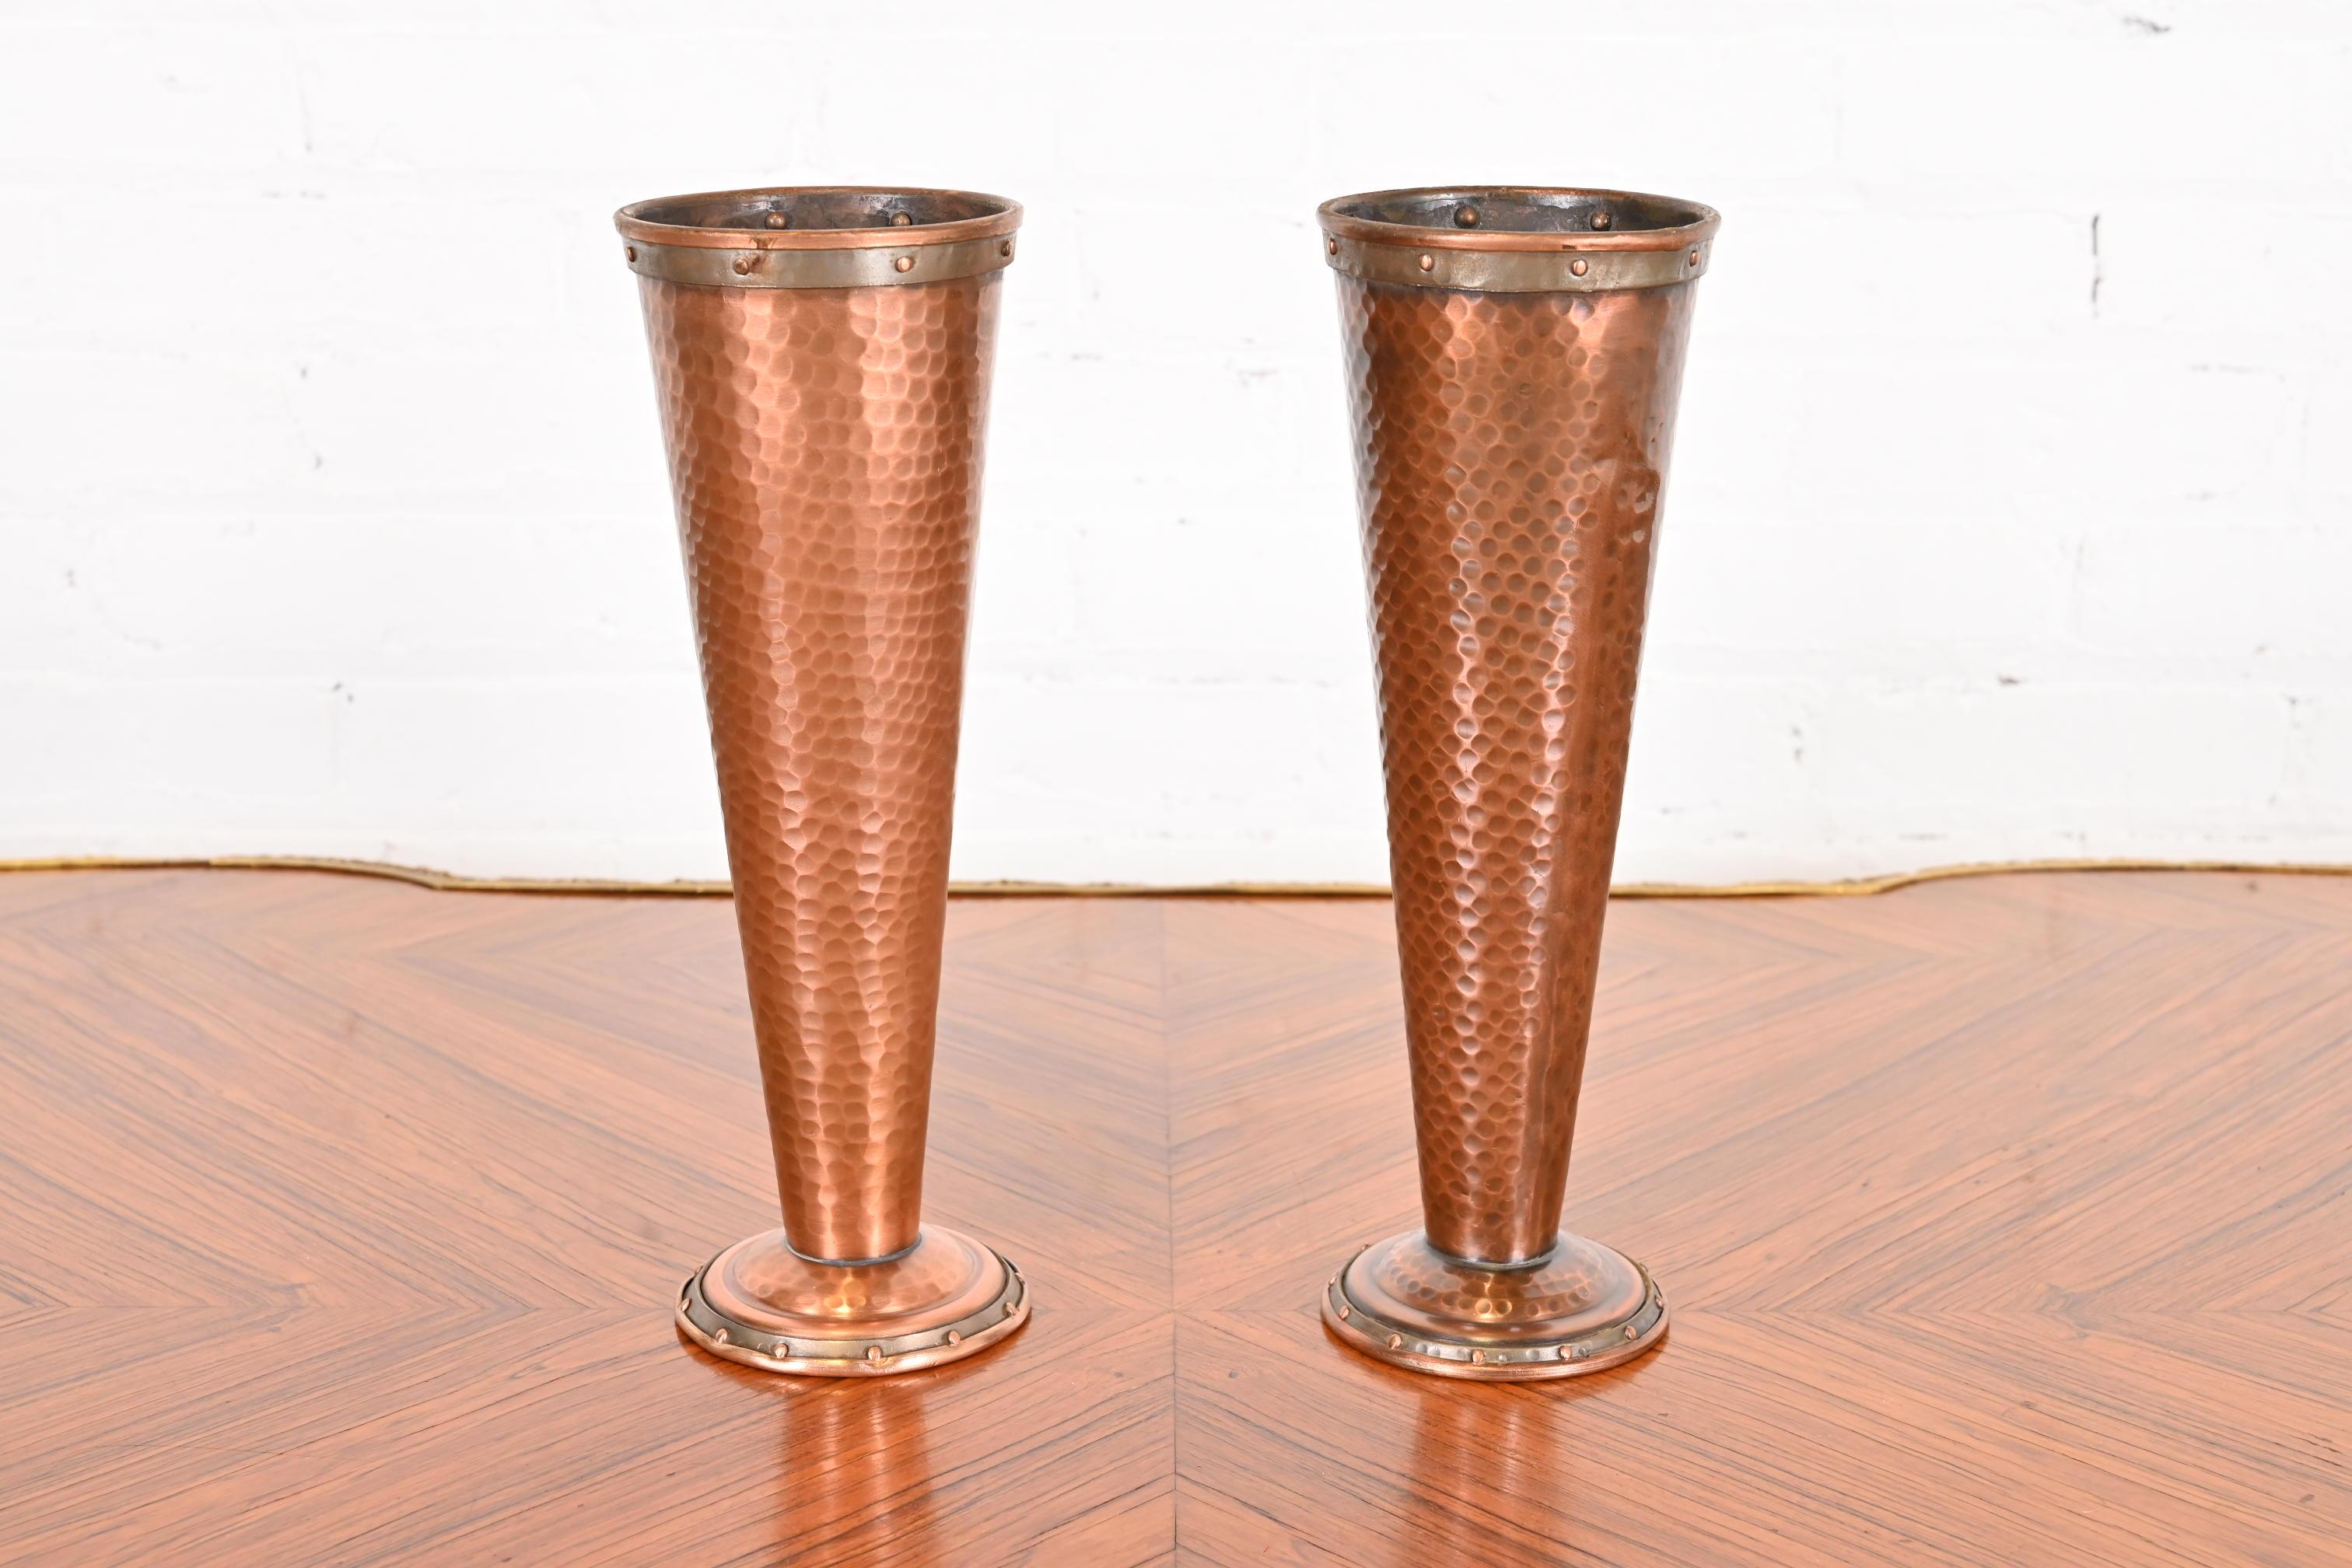 Joseph Heinrichs Style Arts and Crafts Hand-Hammered Copper Vases, Pair For Sale 7